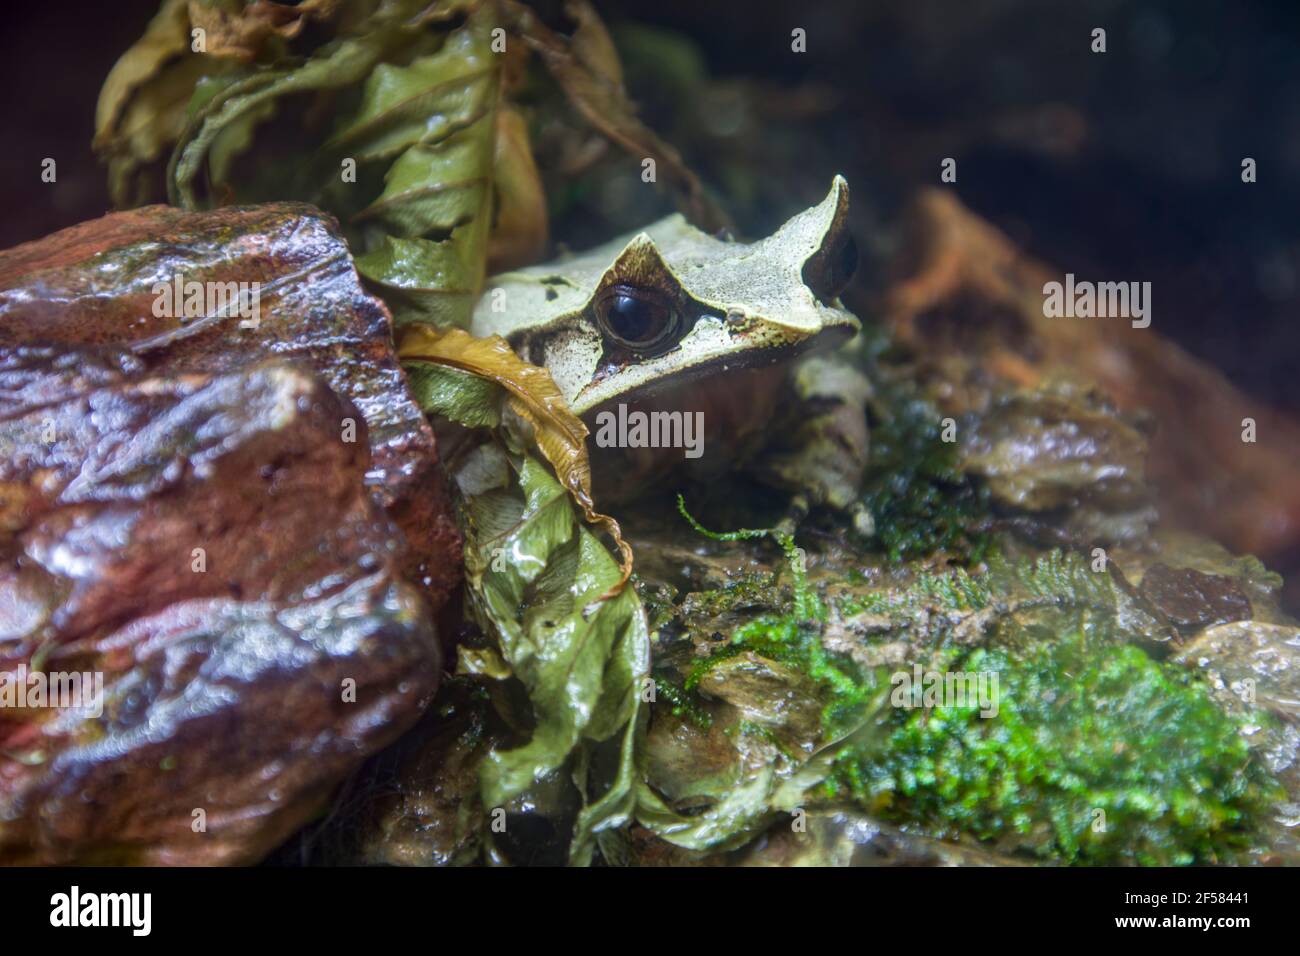 The long-nosed horned frog (Megophrys nasuta) is a species of frog restricted to the rainforest areas of southern Thailand and Peninsular Malaysia Stock Photo